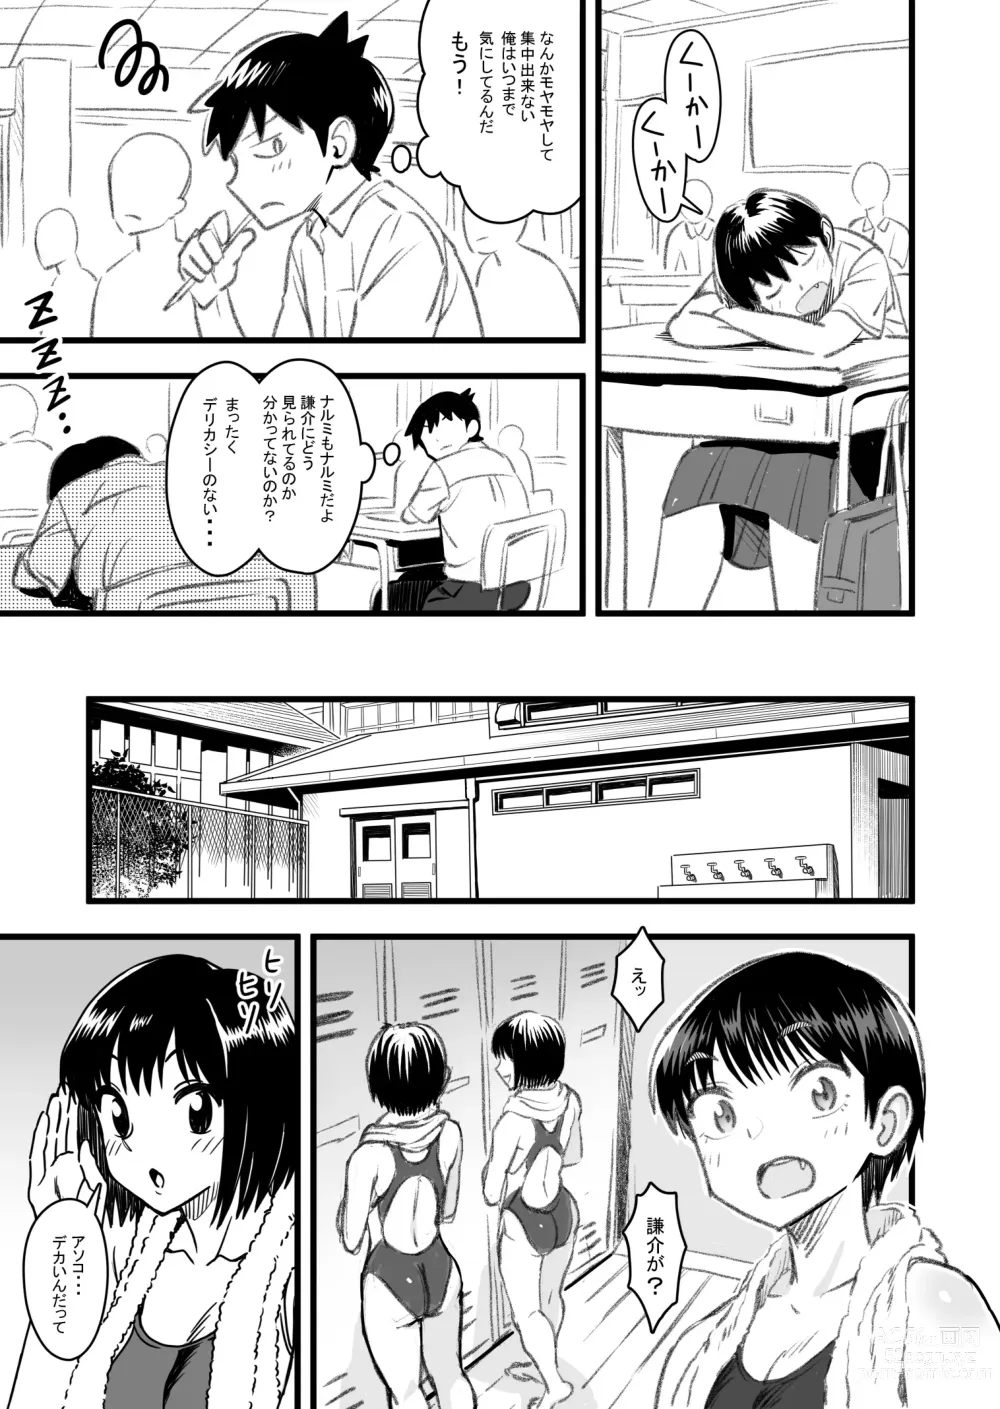 Page 20 of doujinshi How will the Protagonist's Brain be destroyed?